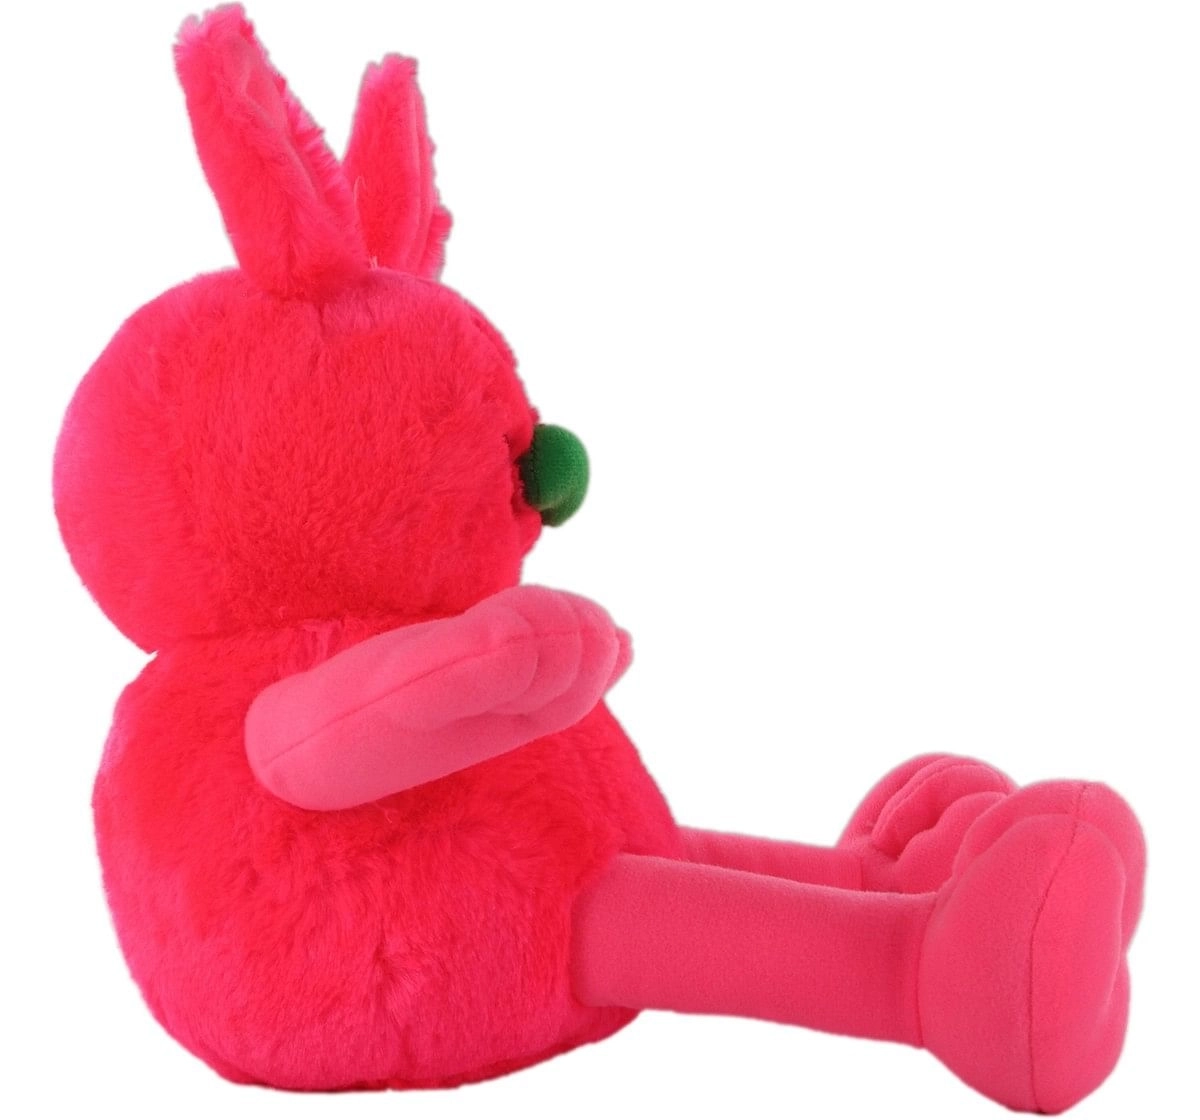 Hamleys Movers & Shakers- Ziggles Pink Interactive Soft Toys for Kids age 3Y+ - 8 Cm (Pink)